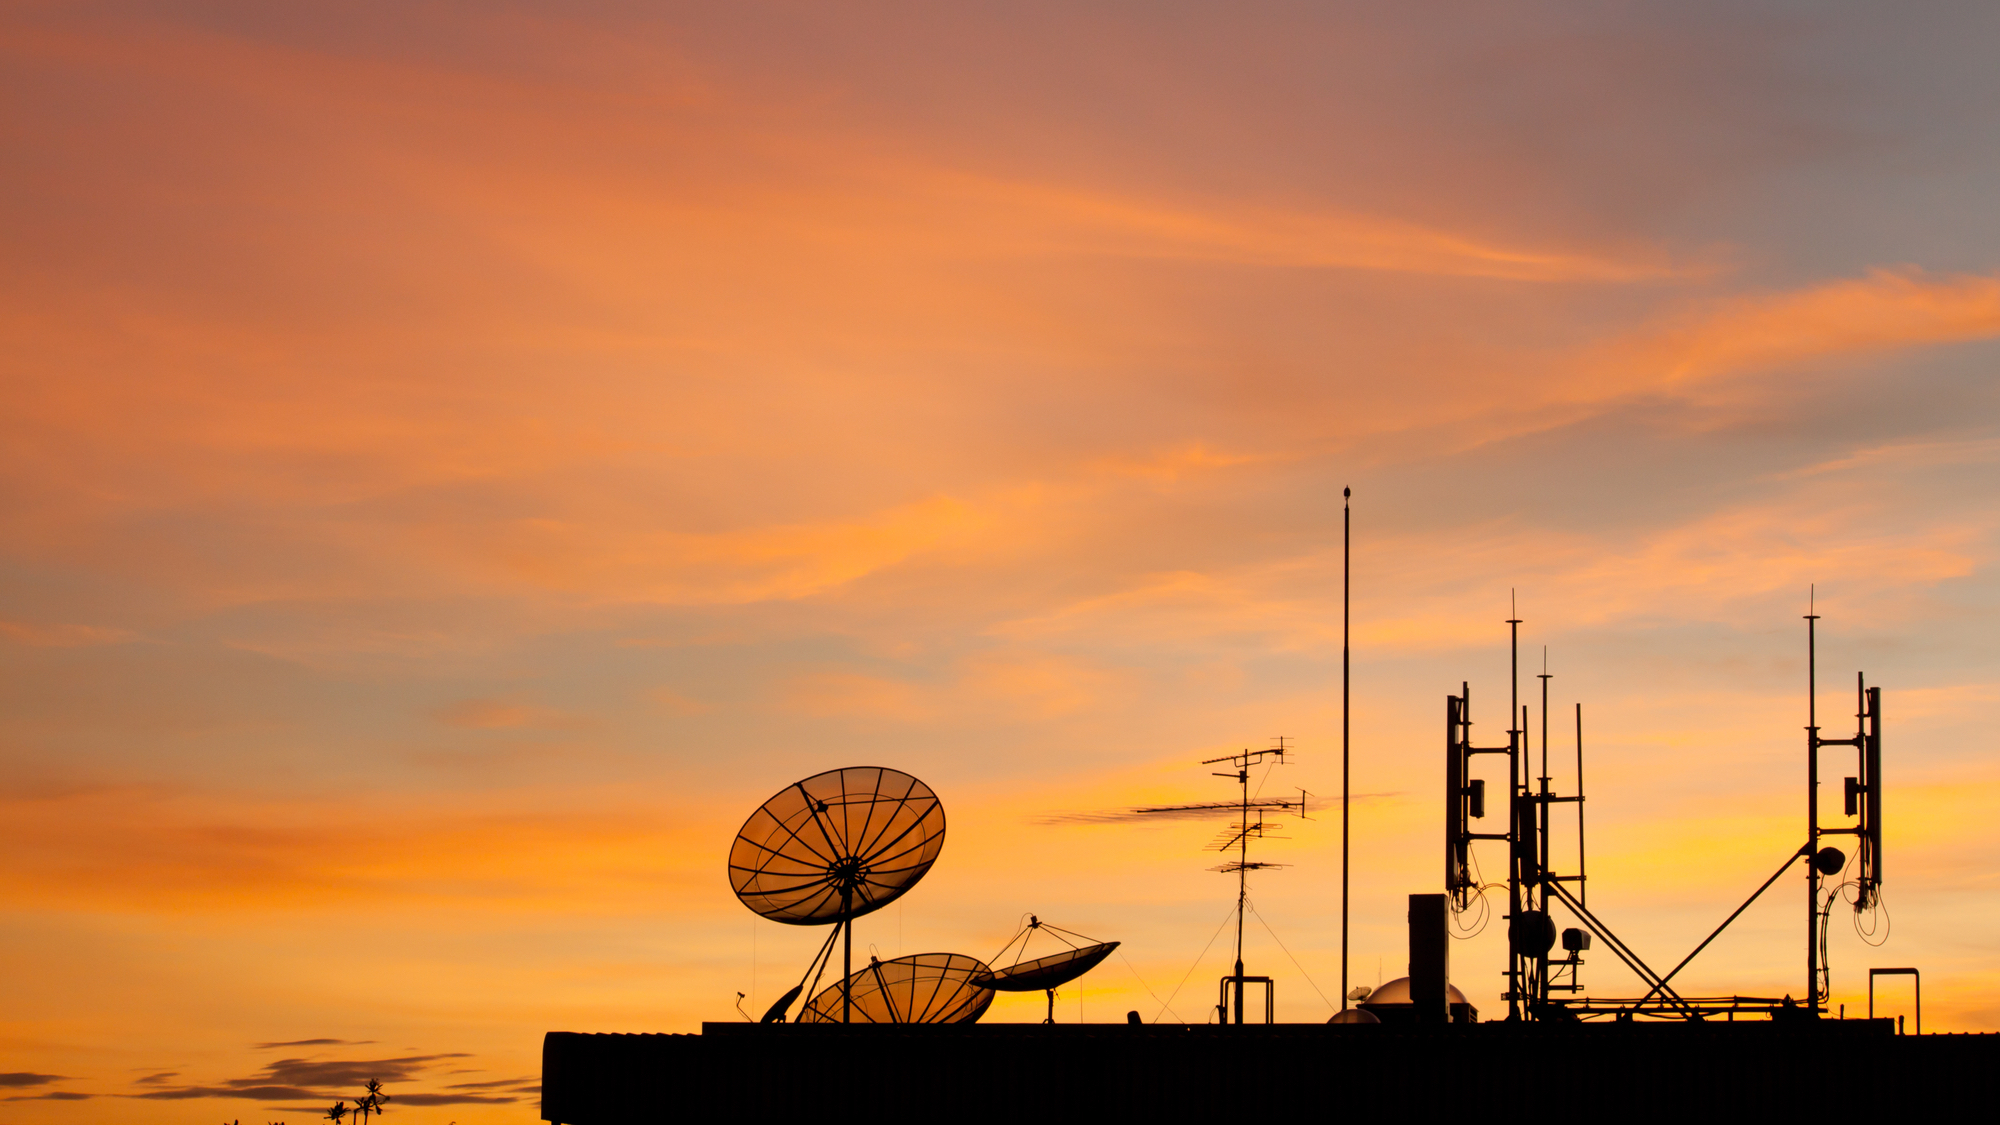 Worldwide Communication, Satellite and other antenna network against sky at sunset, silhouette style